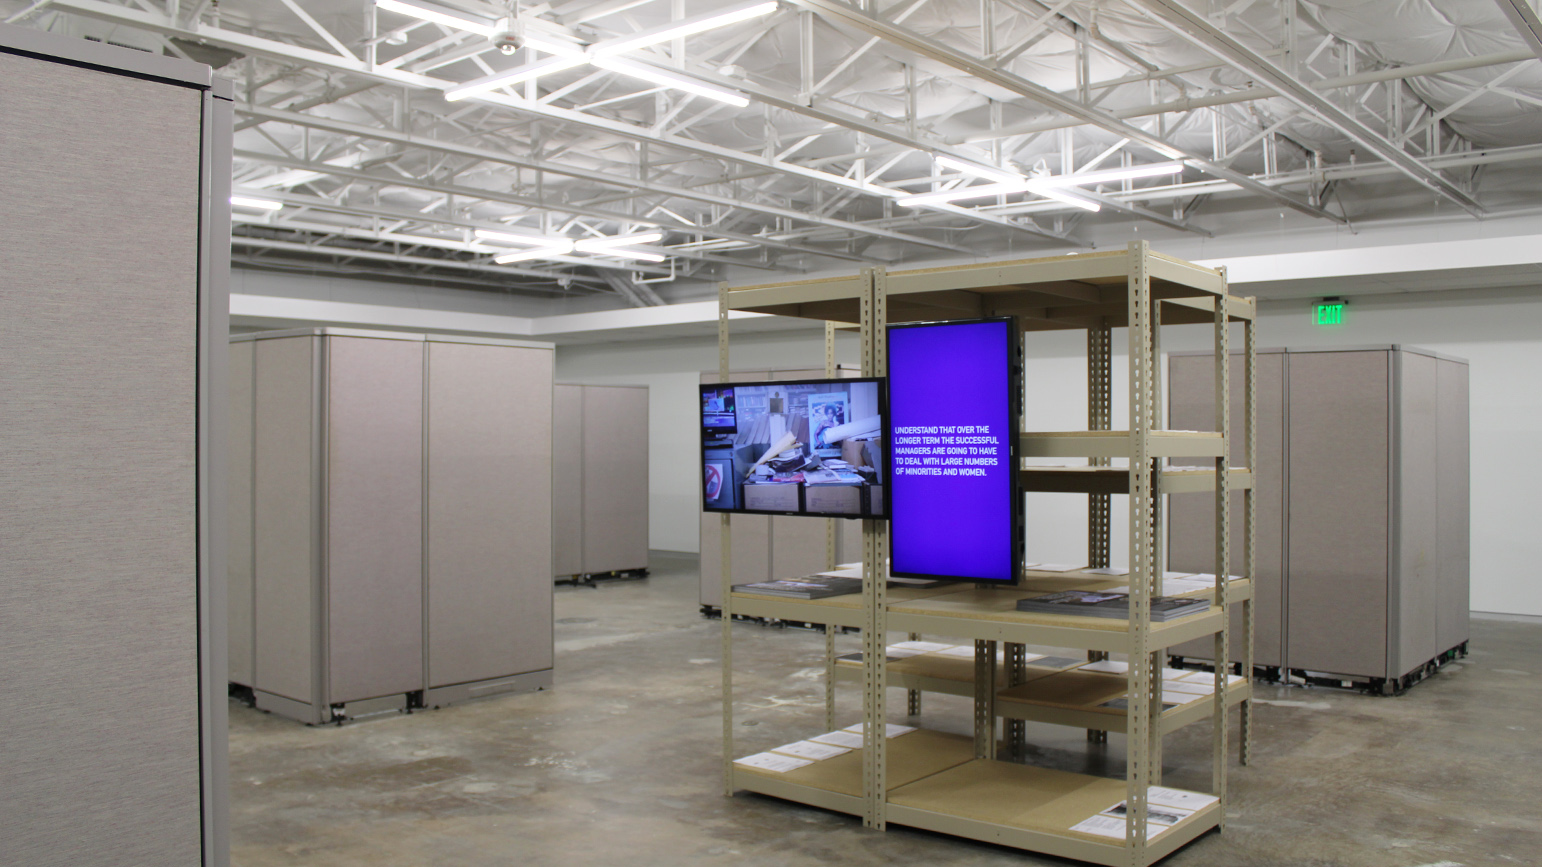 Gallery installation with cubicles, metal shelving, and two flat screen televisions